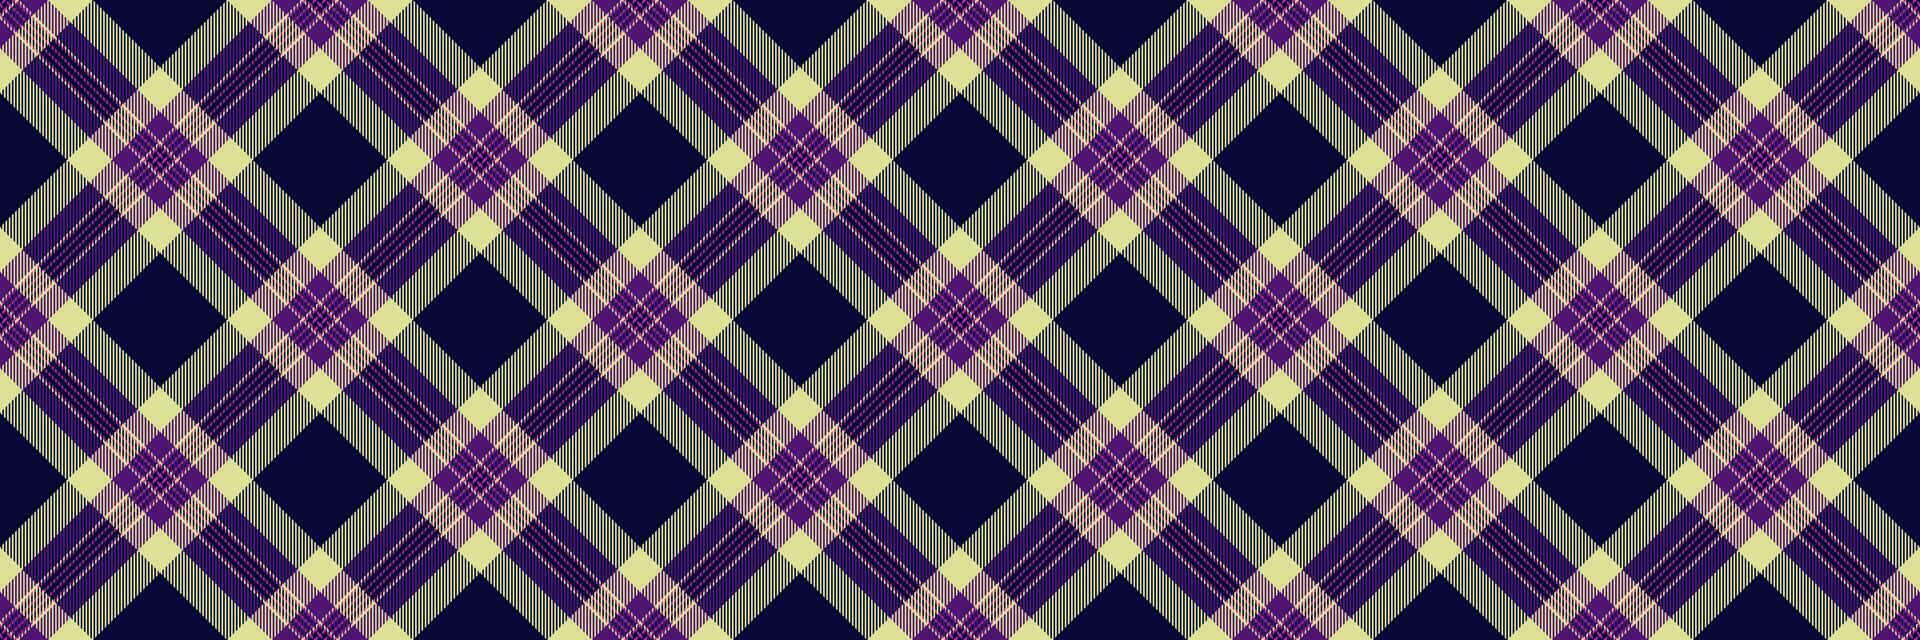 Tribal textile texture pattern, stripe check vector tartan. Home background fabric plaid seamless in dark and yellow colors.